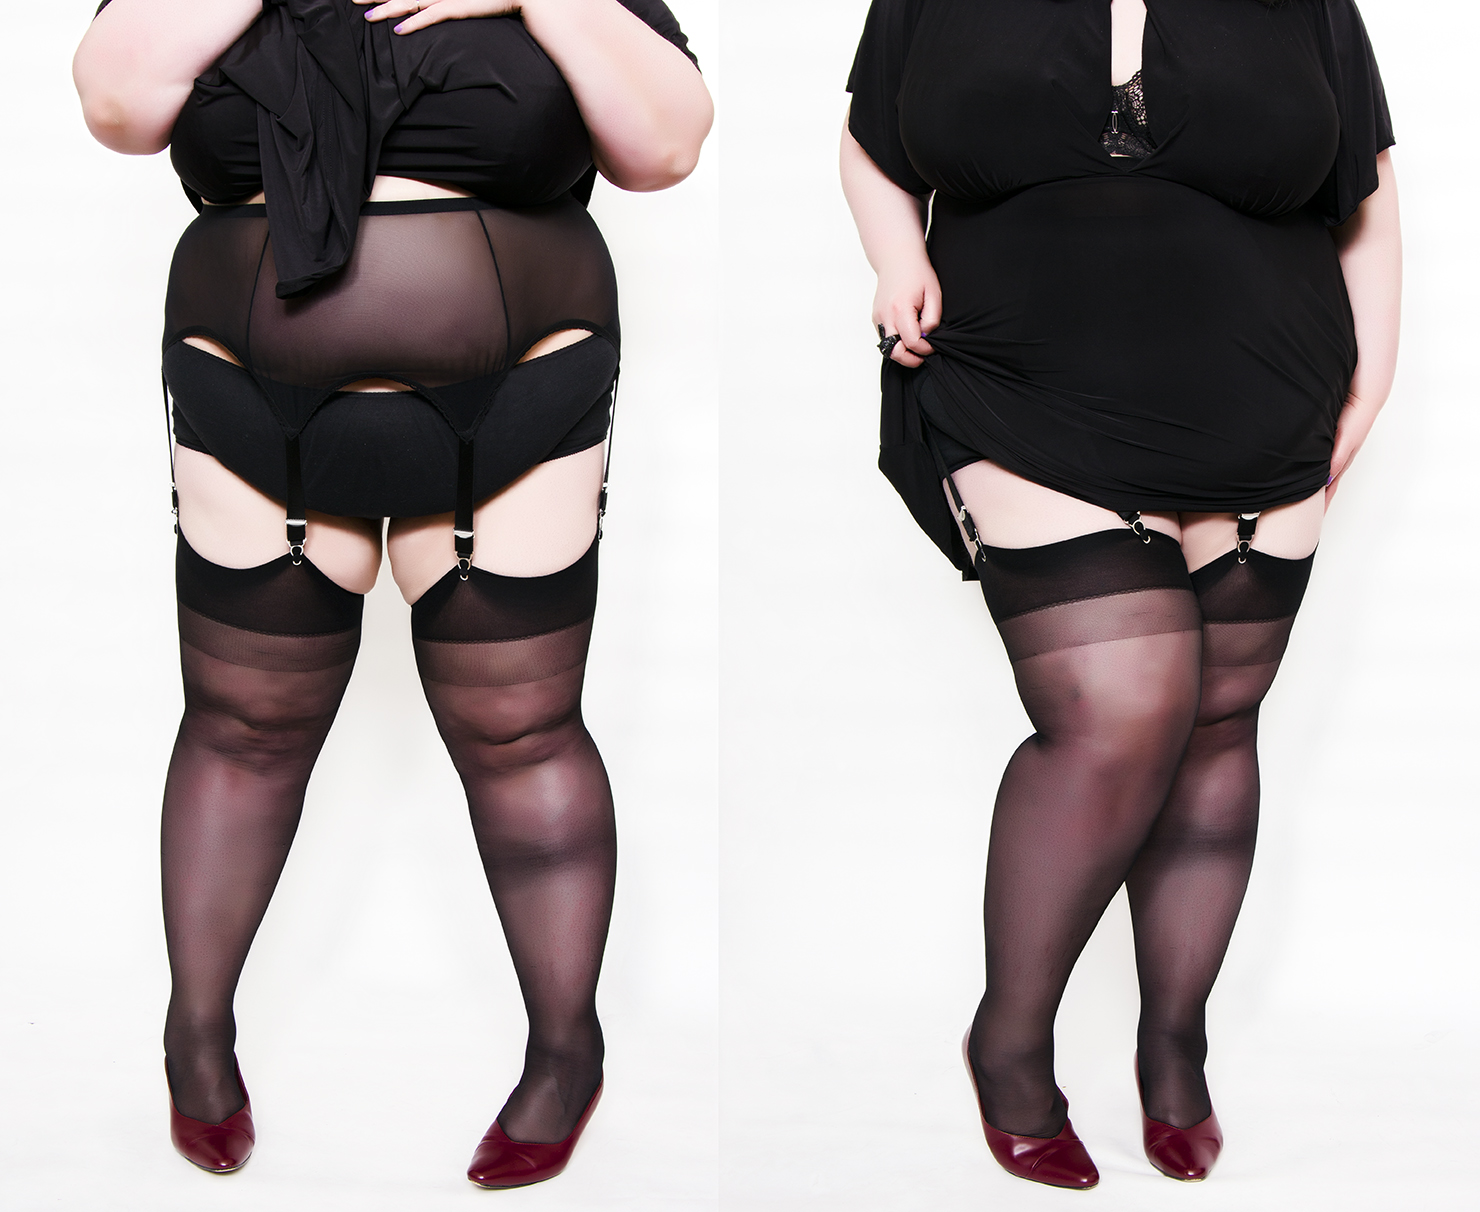 Sock It To Me - Stockings and Suspenders from The Big Tights Company